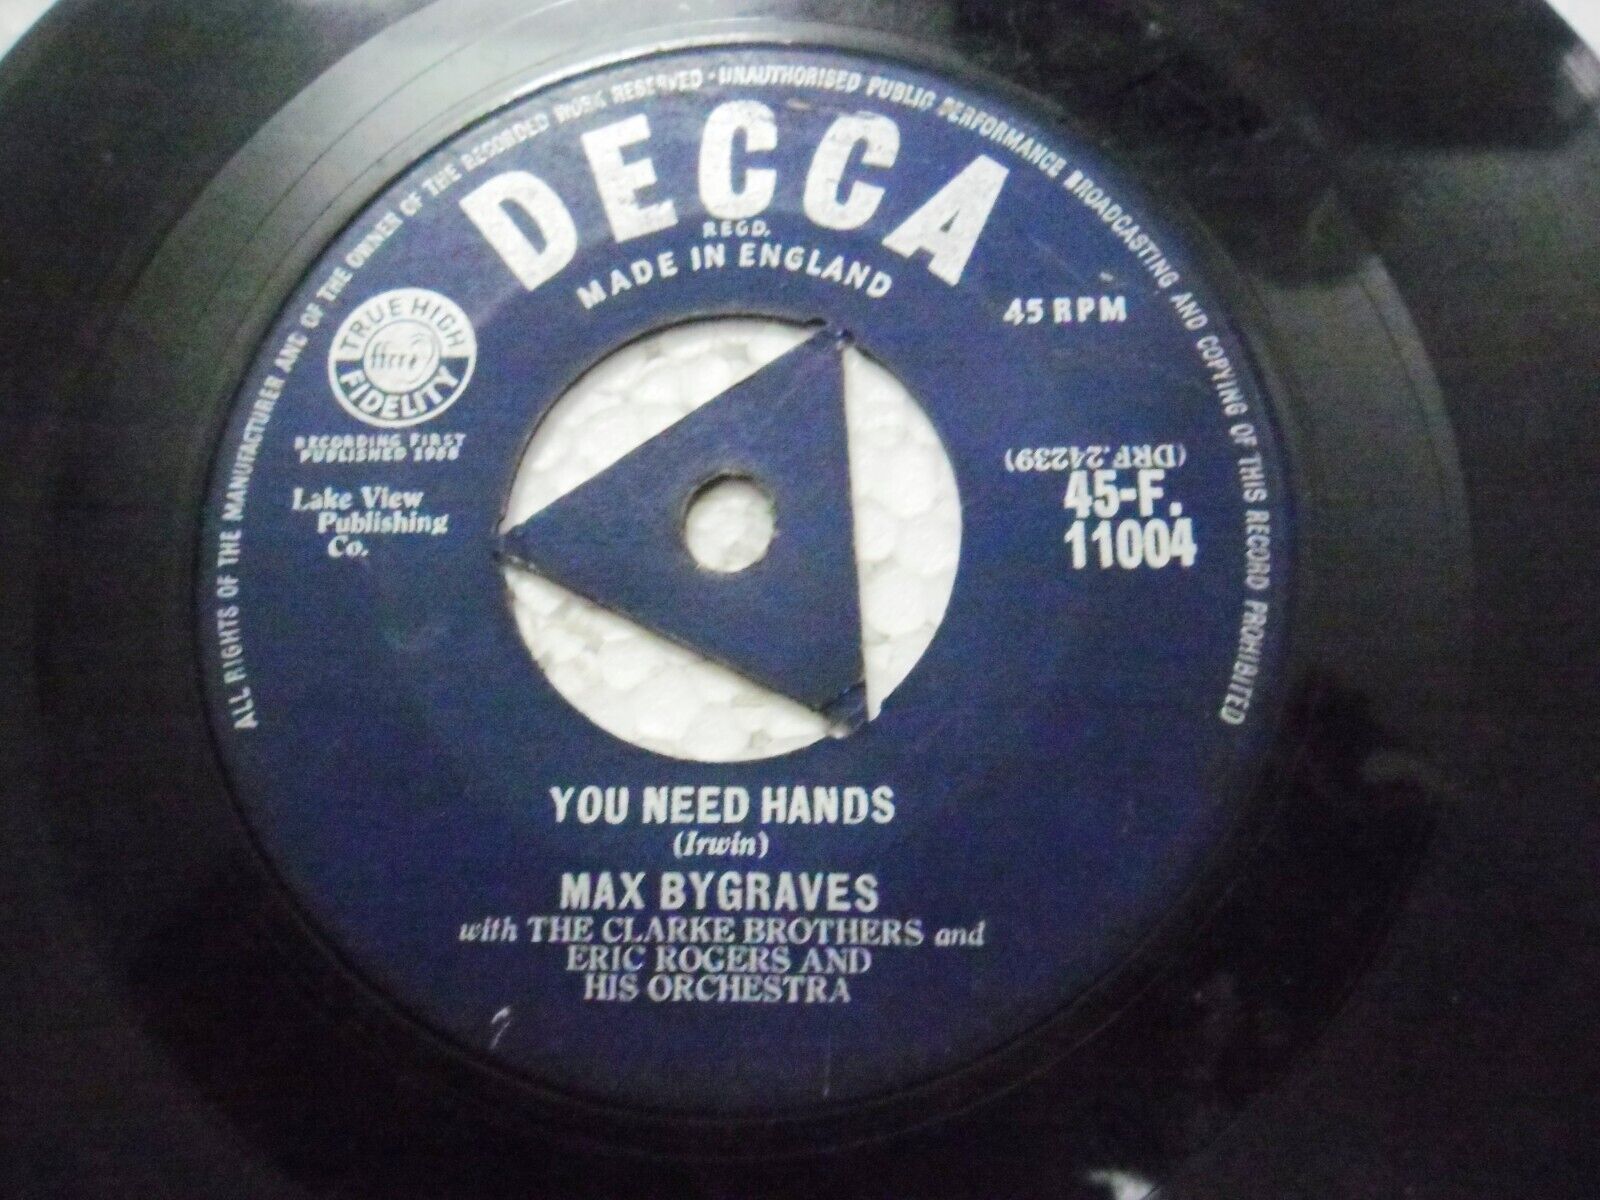 MAX BYGRAVES CLARKE BROTHERS & ERIC ROGERS & HIS ORCHESTRA  SINGLE ENGLAND VG+